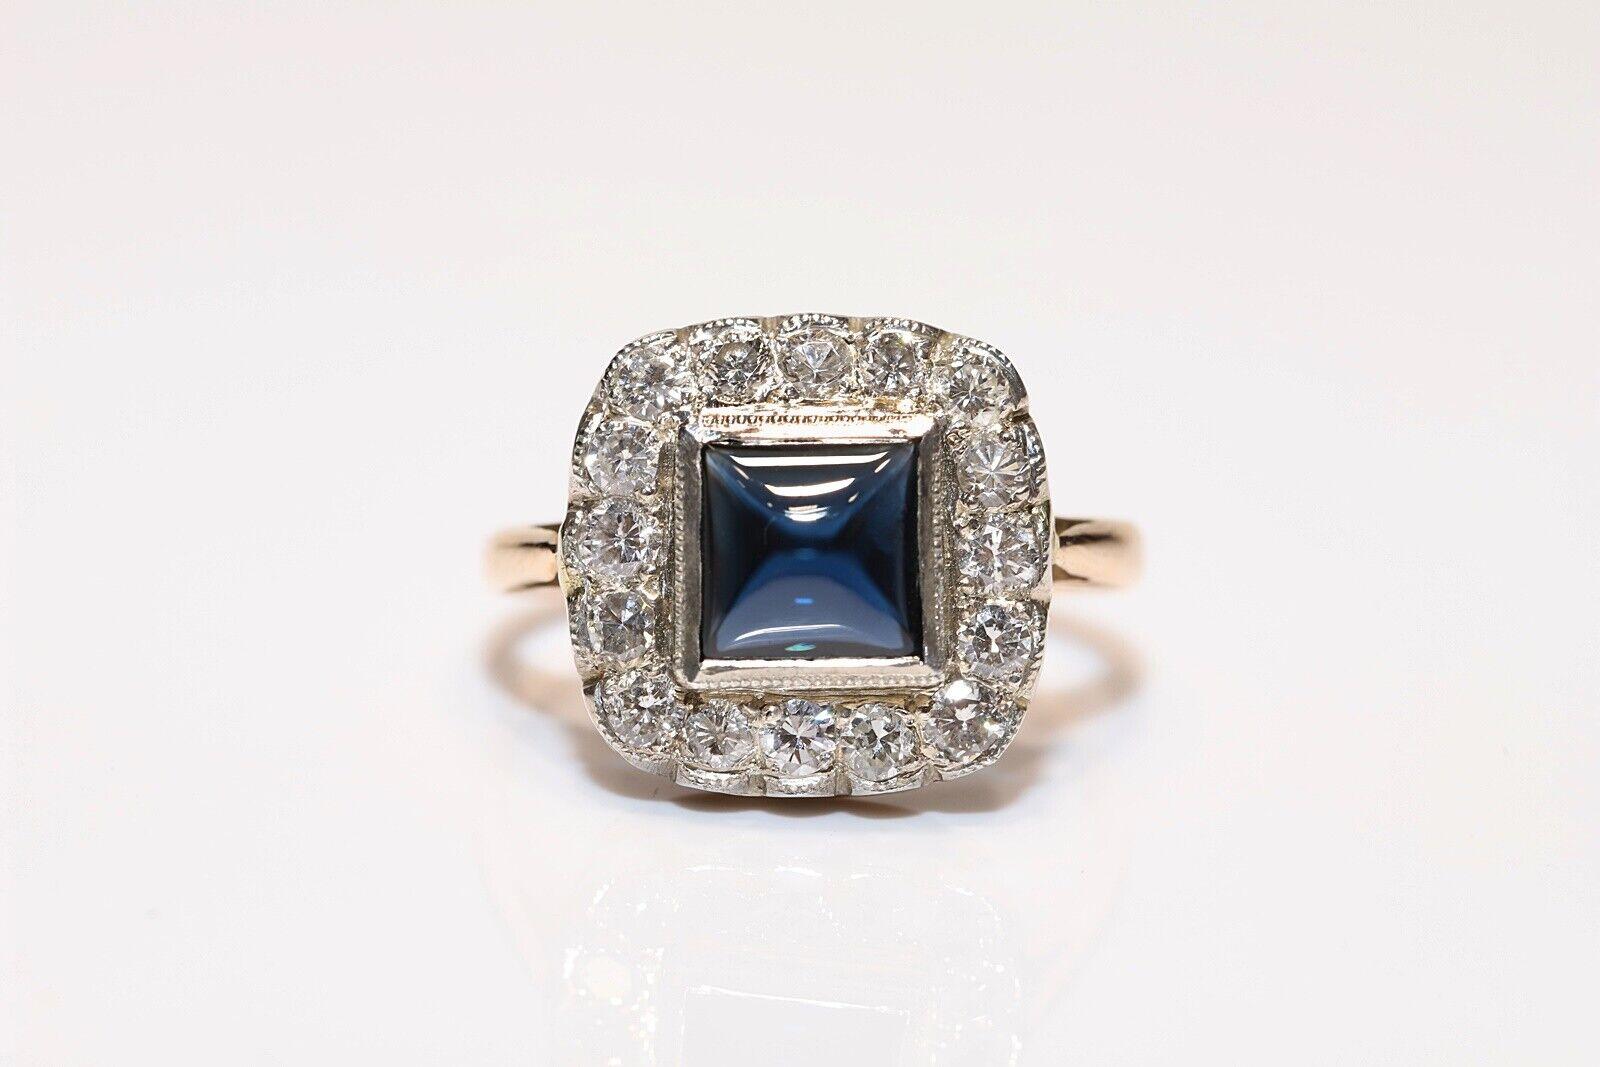 Antique Circa 1920s Art Deco 14k Gold Natural Diamond And Cabochon Sapphire Ring For Sale 4